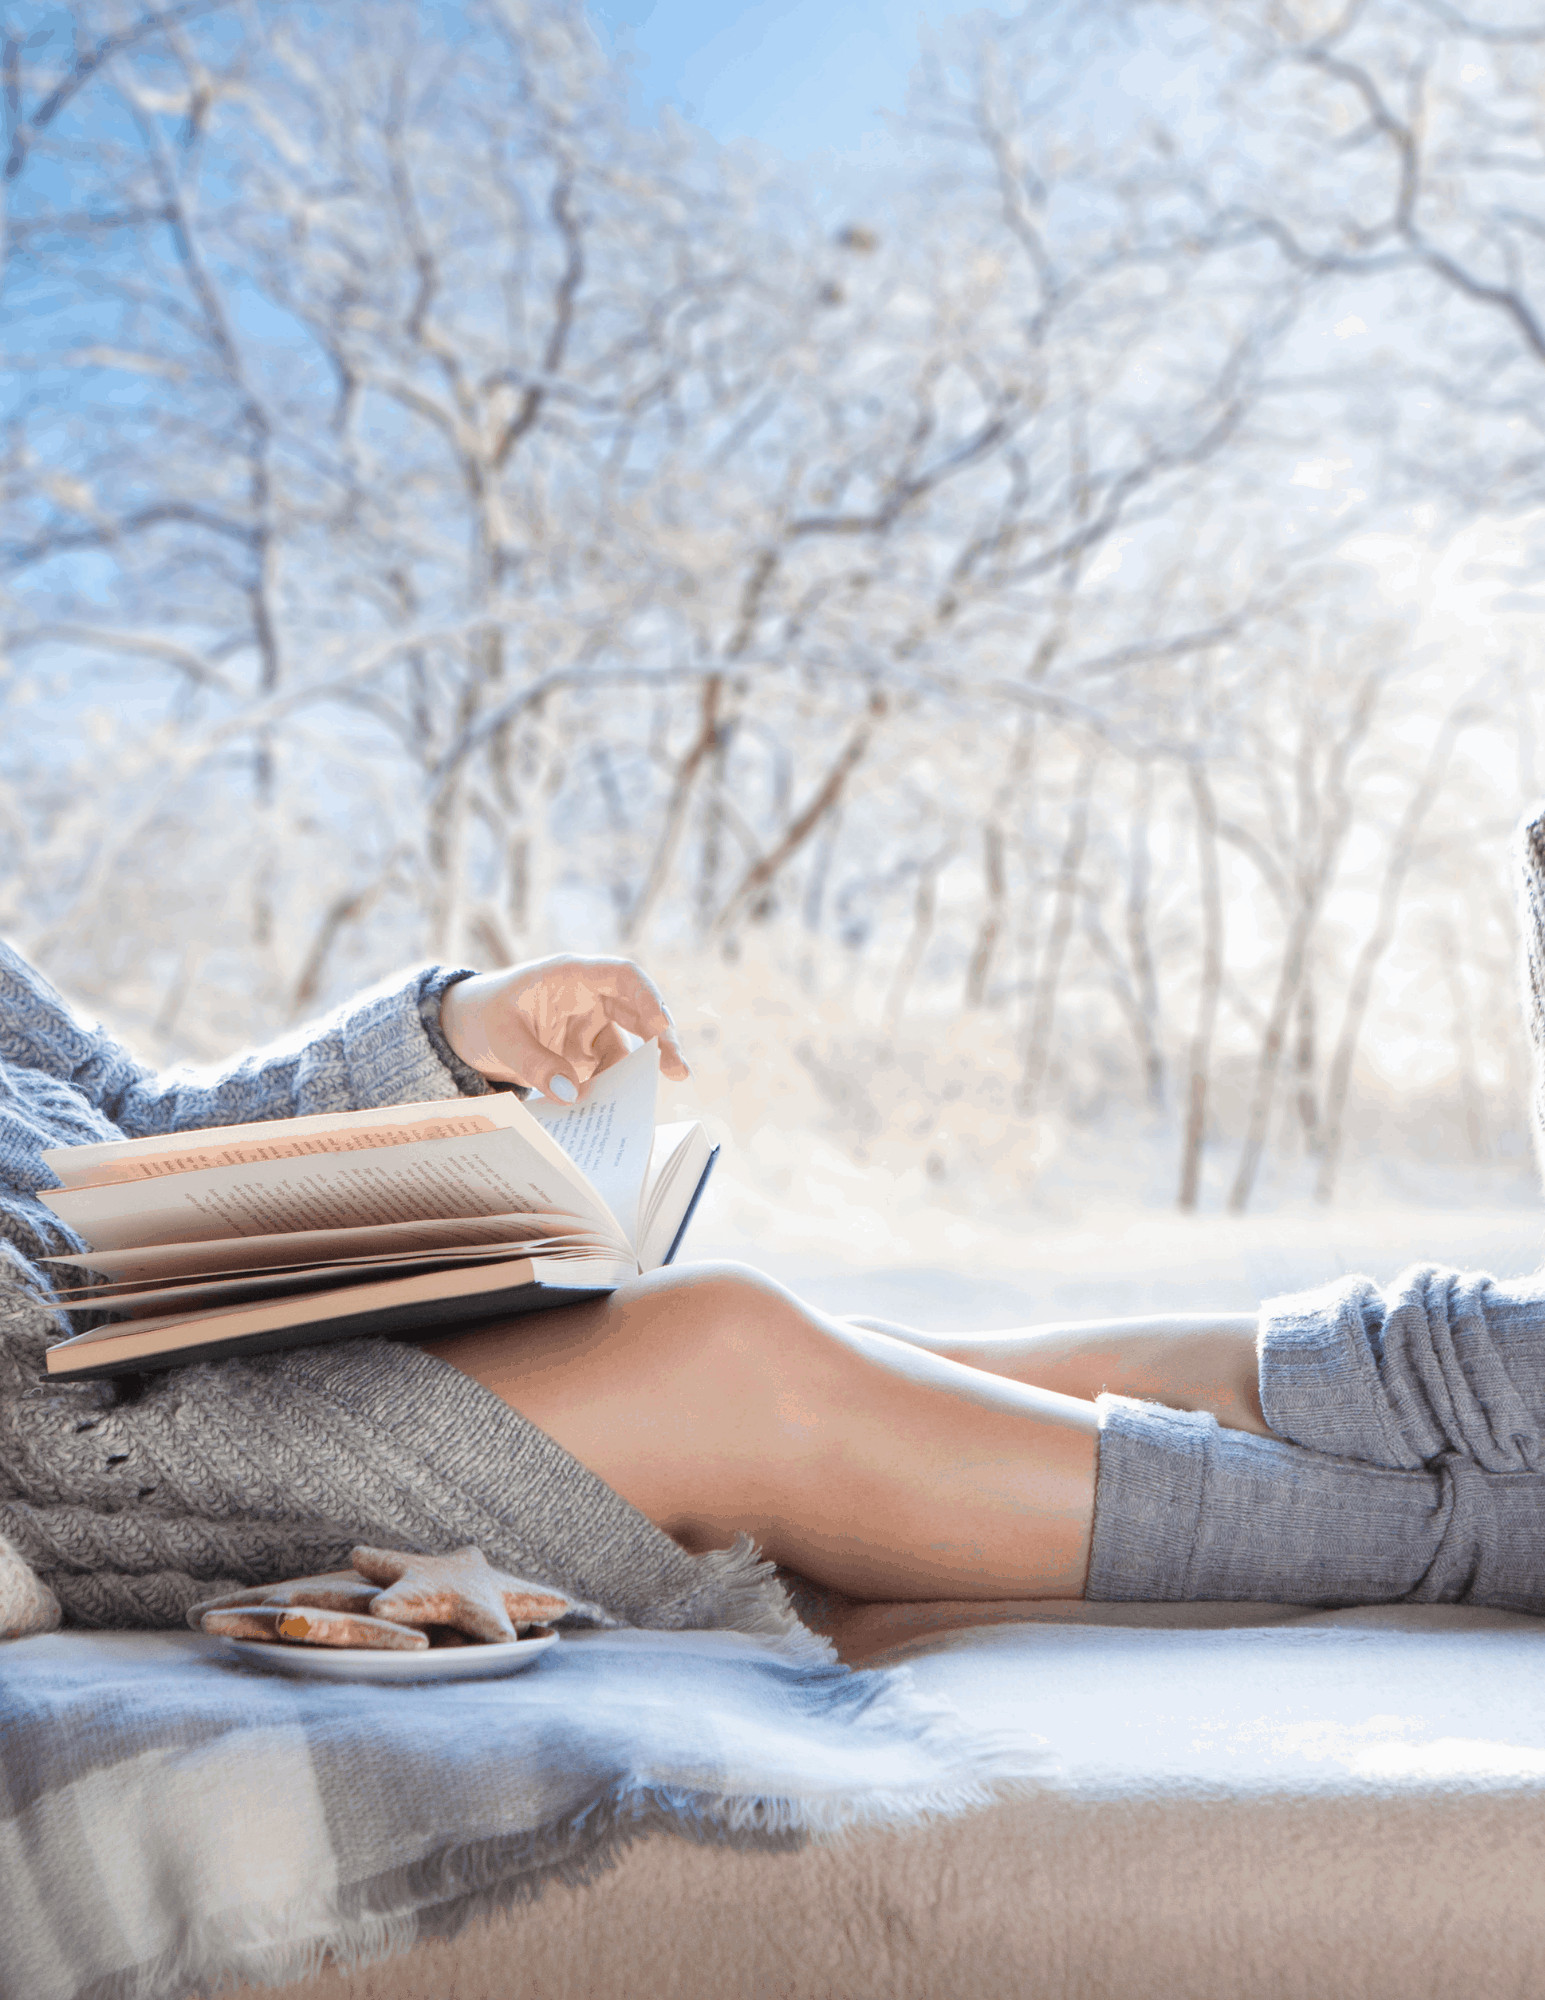 The 2021 Winter Reading Guide